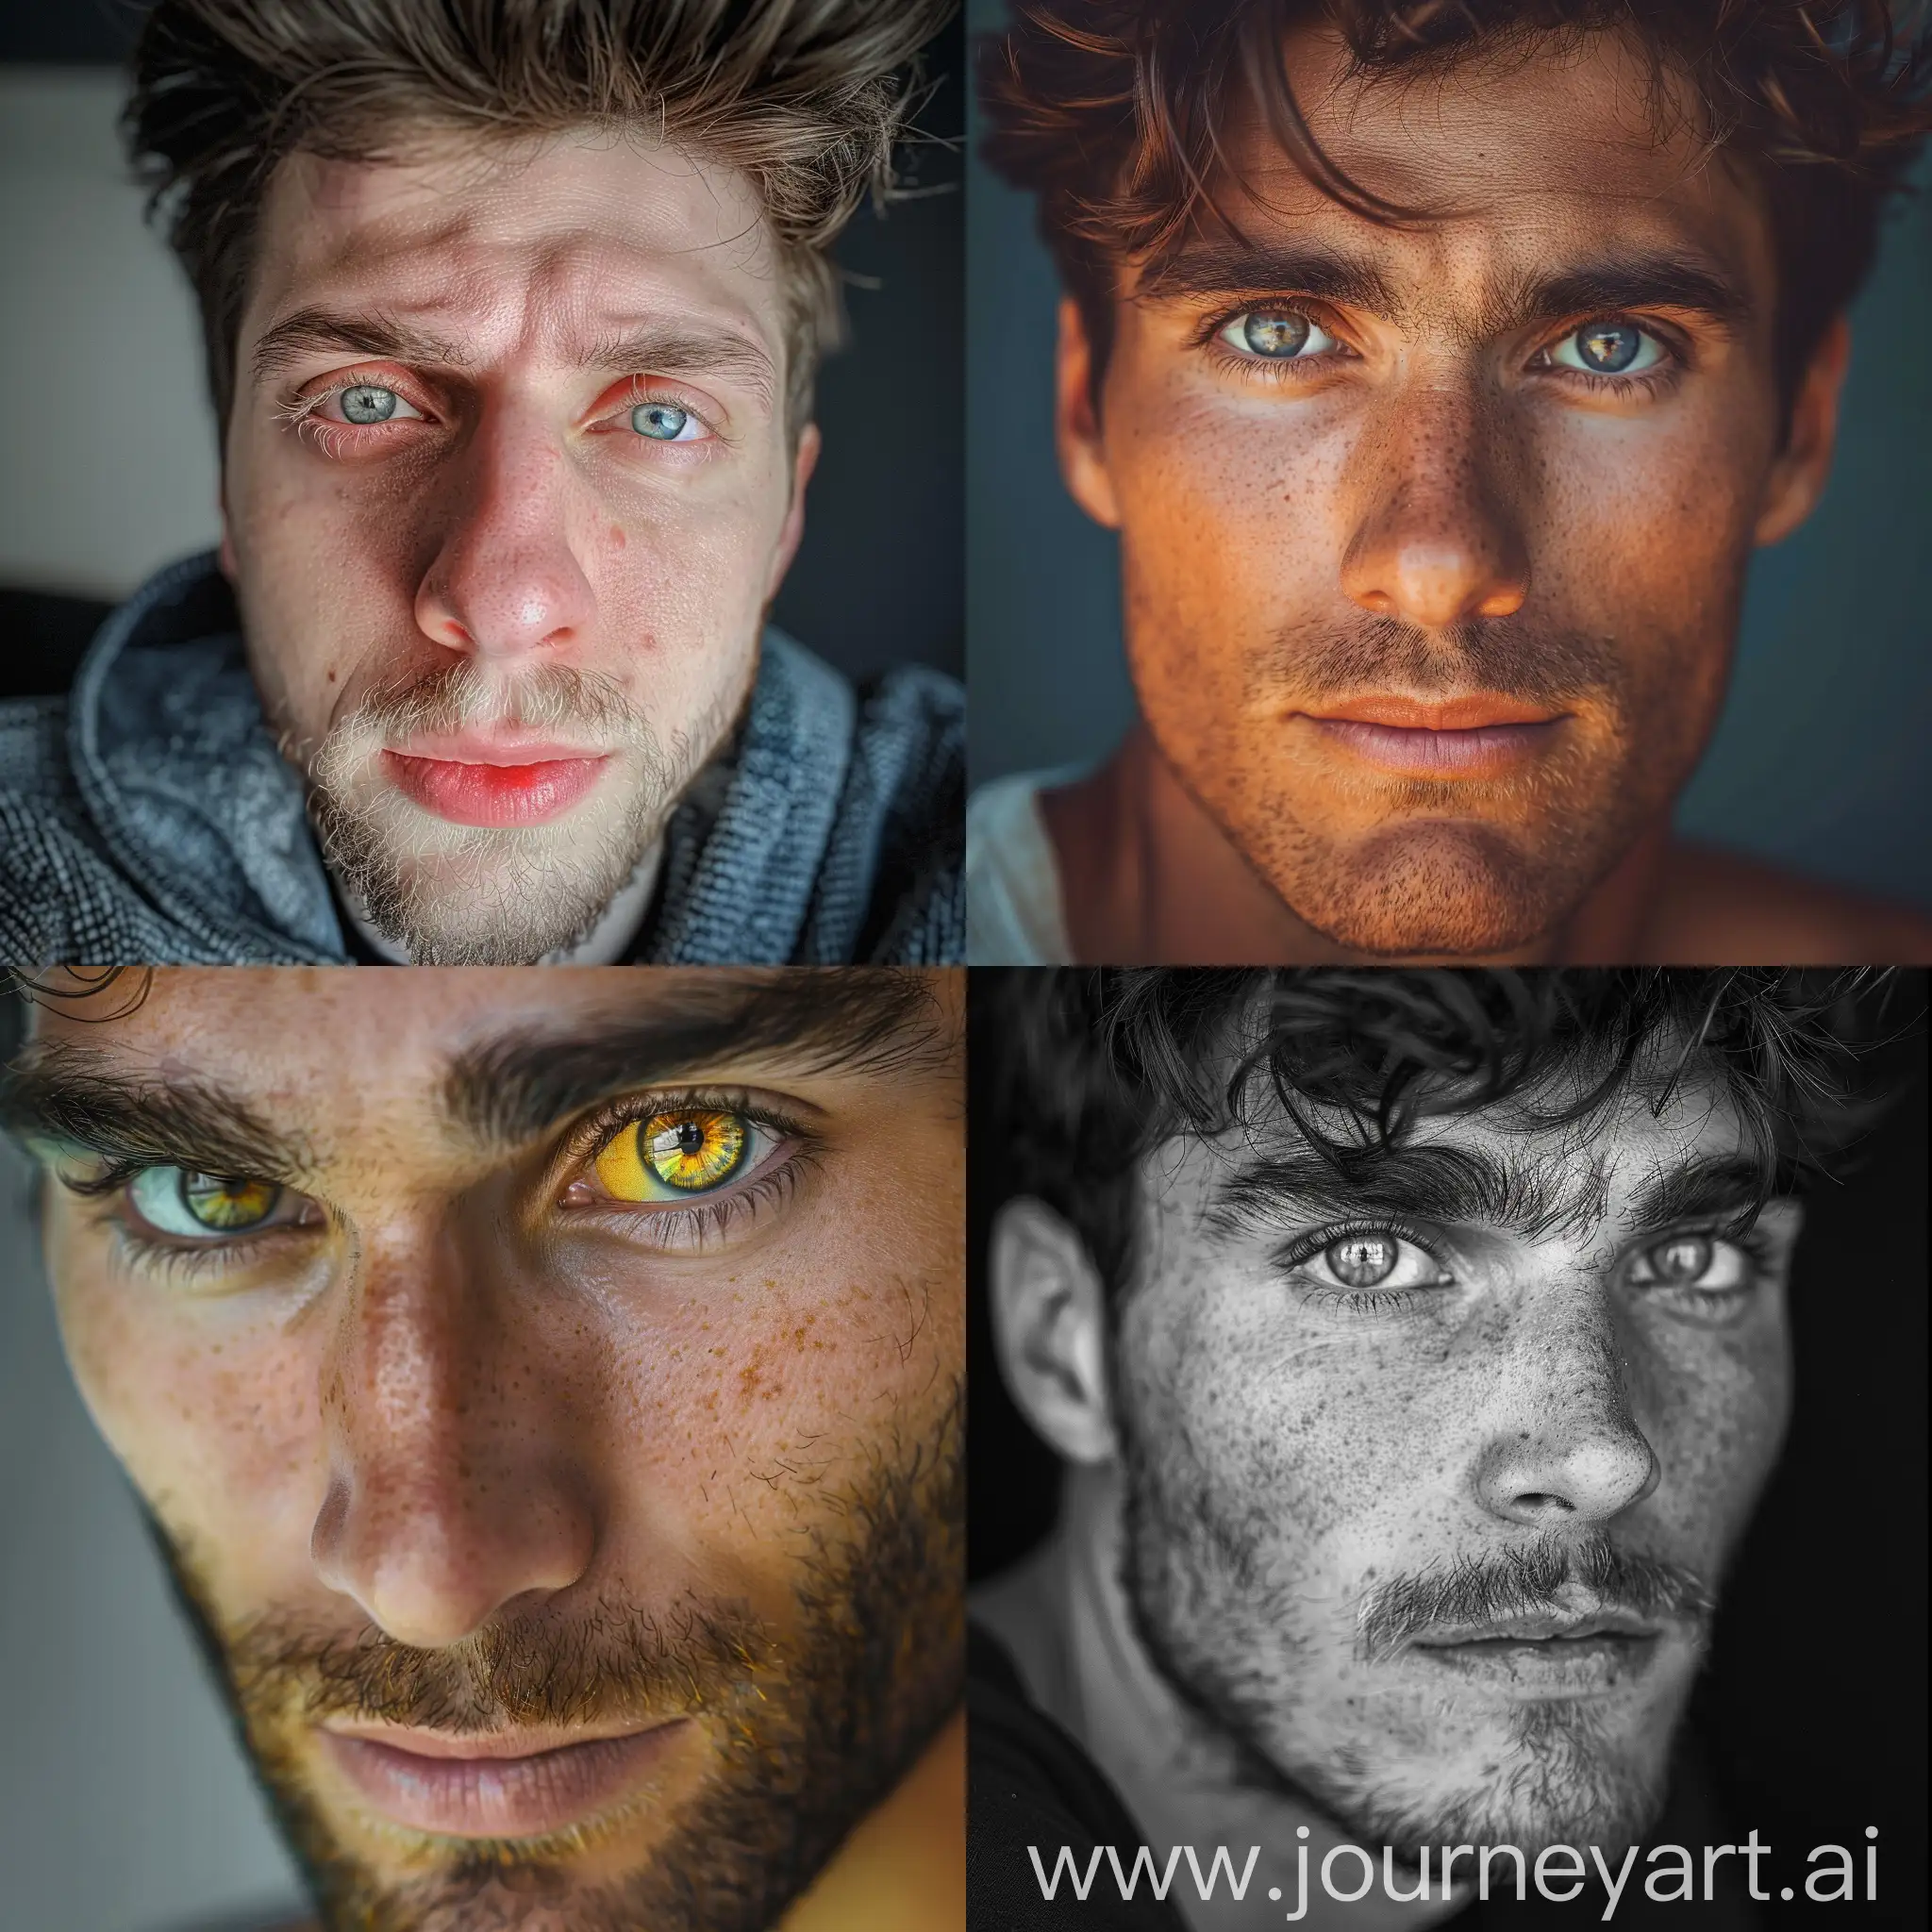 Photo of a man with heterochromatic eyes